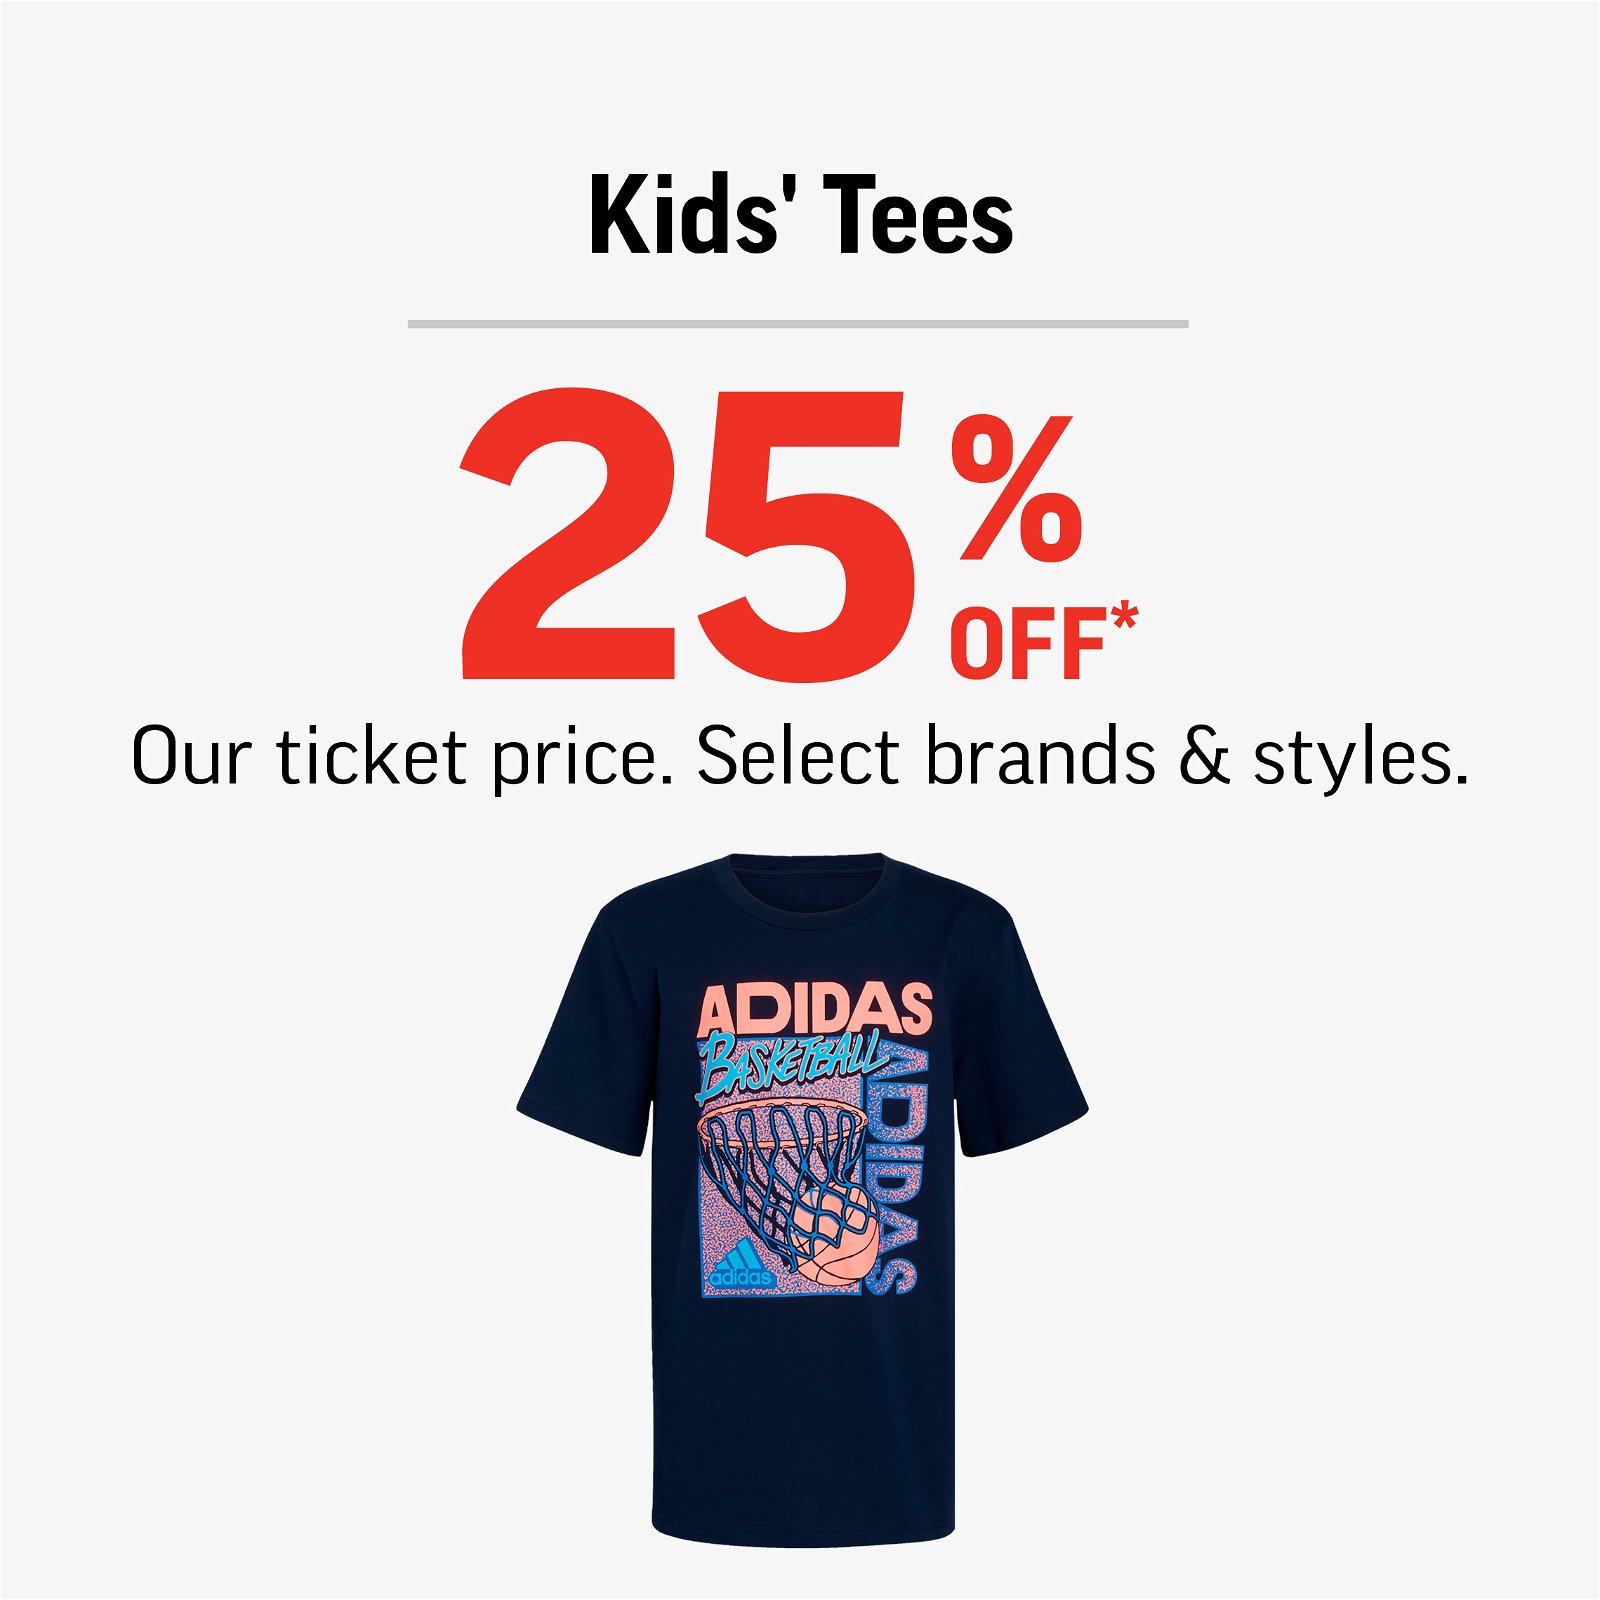 KIDS' TEES 25% OFF OUR TICKET PRICE. SELECT BRANDS & STYLES